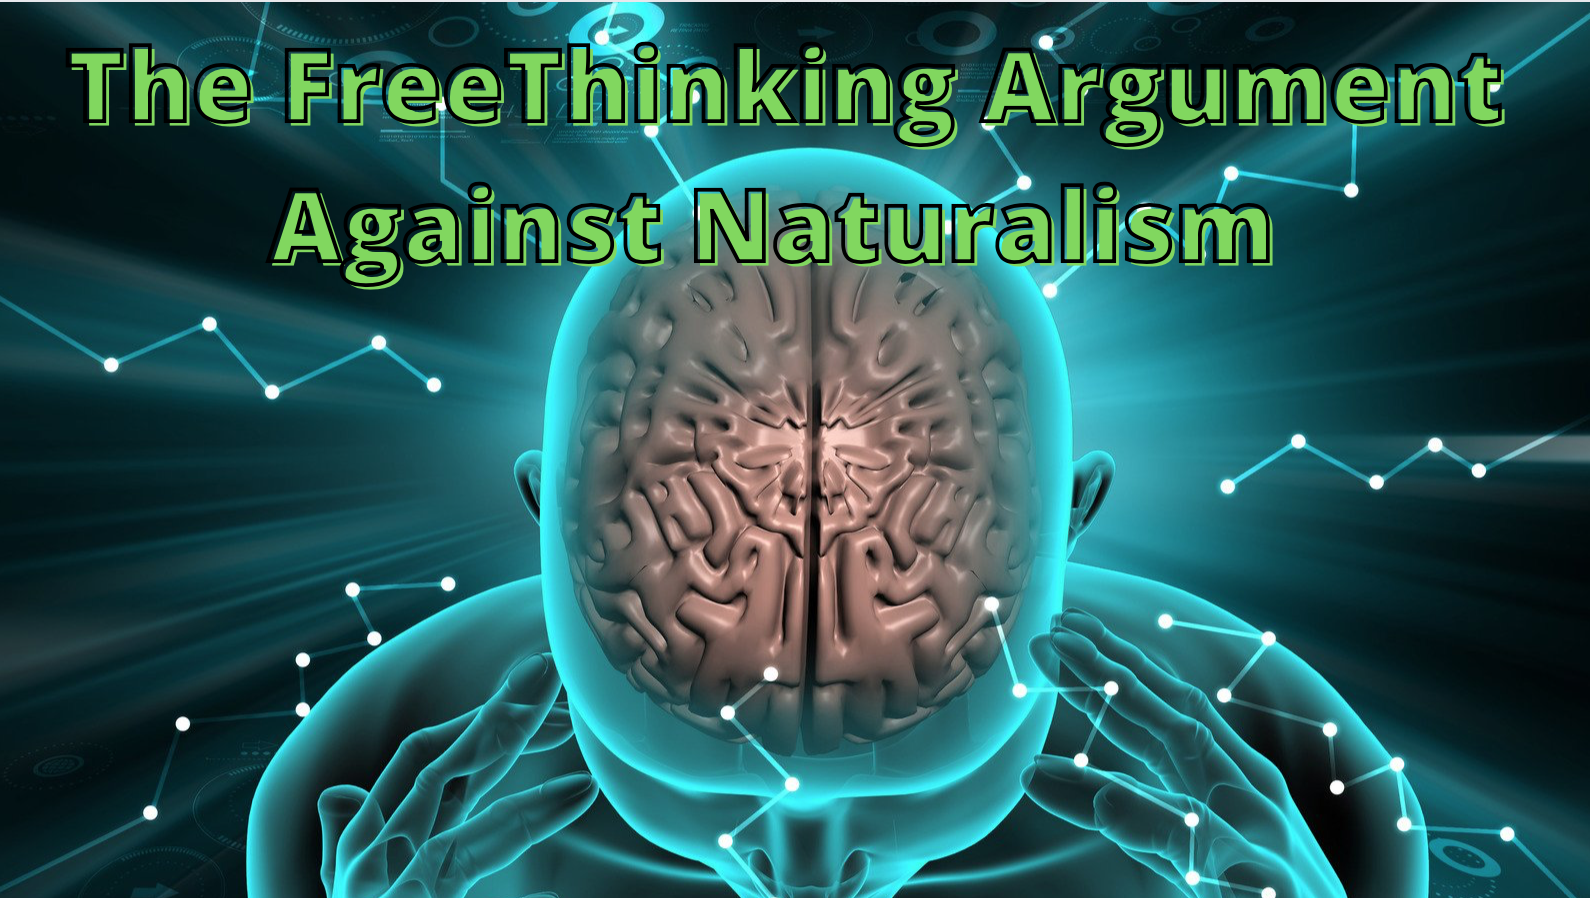 The FreeThinking Argument Against Naturalism